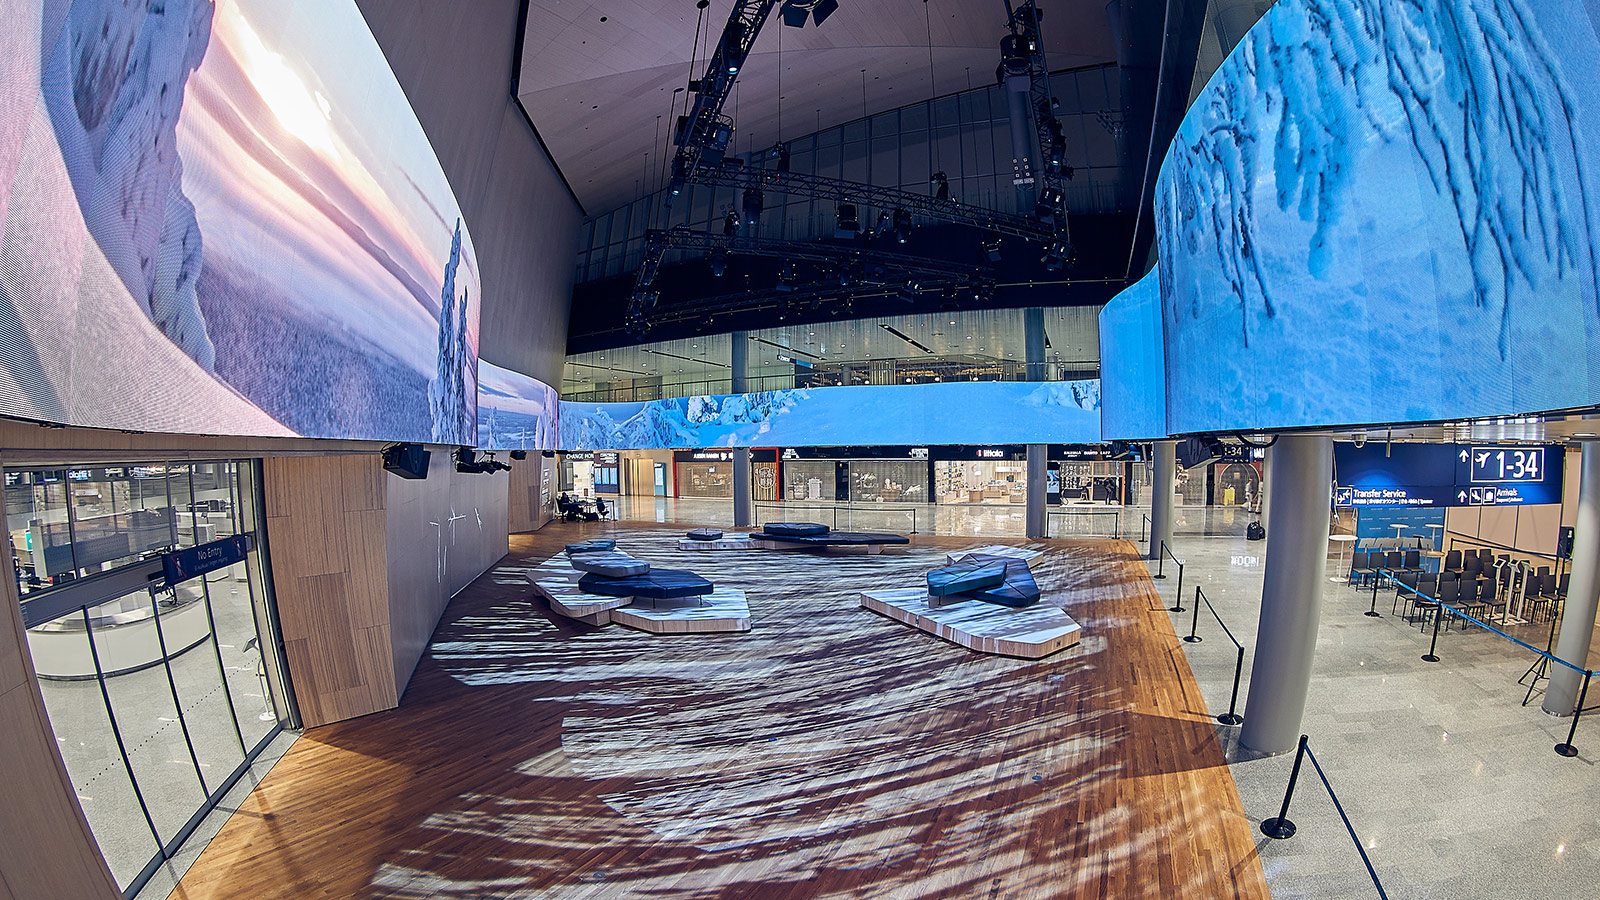 Meyer Sound Loudspeakers Enhance the Natural Ambience at Helsinki Airport’s “Aukio”